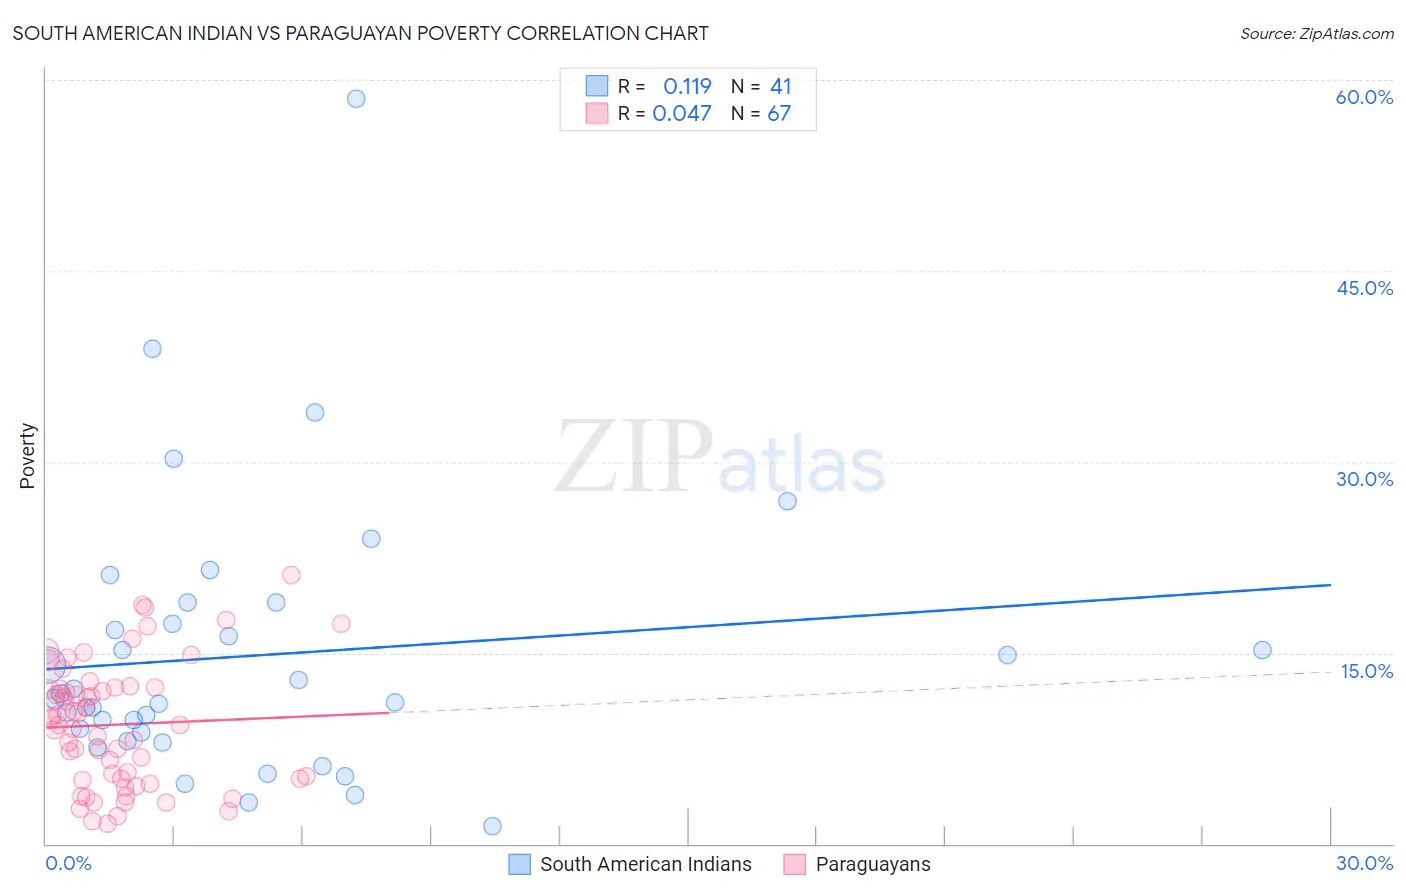 South American Indian vs Paraguayan Poverty